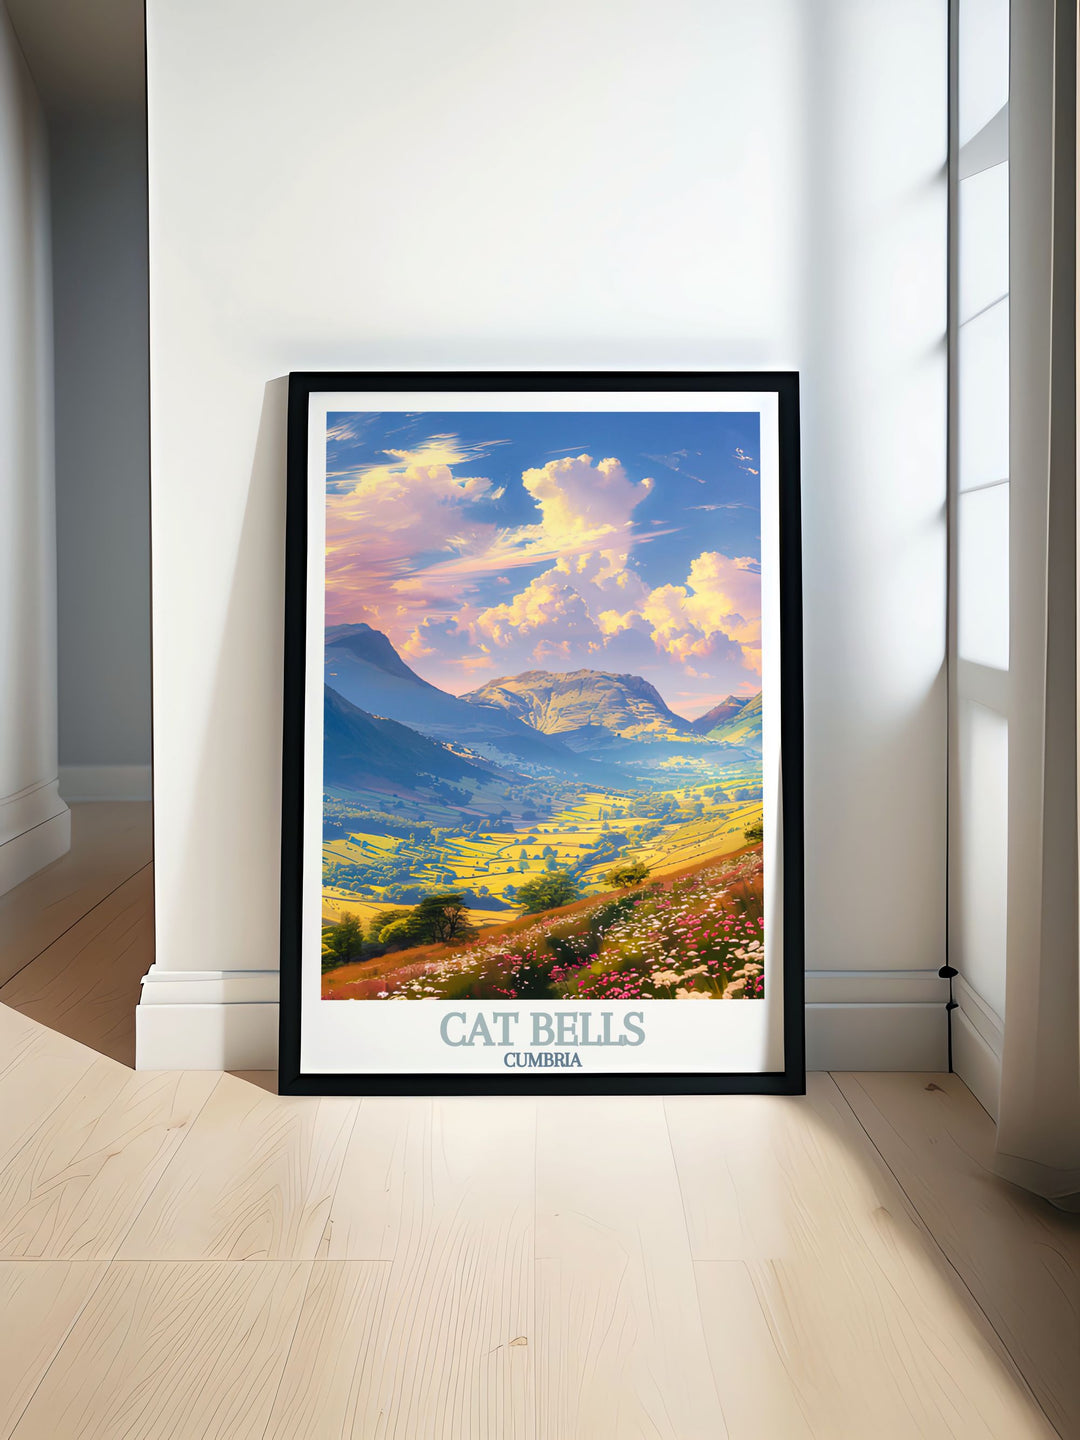 Newlands Valley travel poster showcasing the serene landscape of the Lake District perfect for wall decor this mountain print captures the beauty of Derwentwater and Cat Bells Cumbria making it ideal for home living decor and as a gift for hikers who love nature.